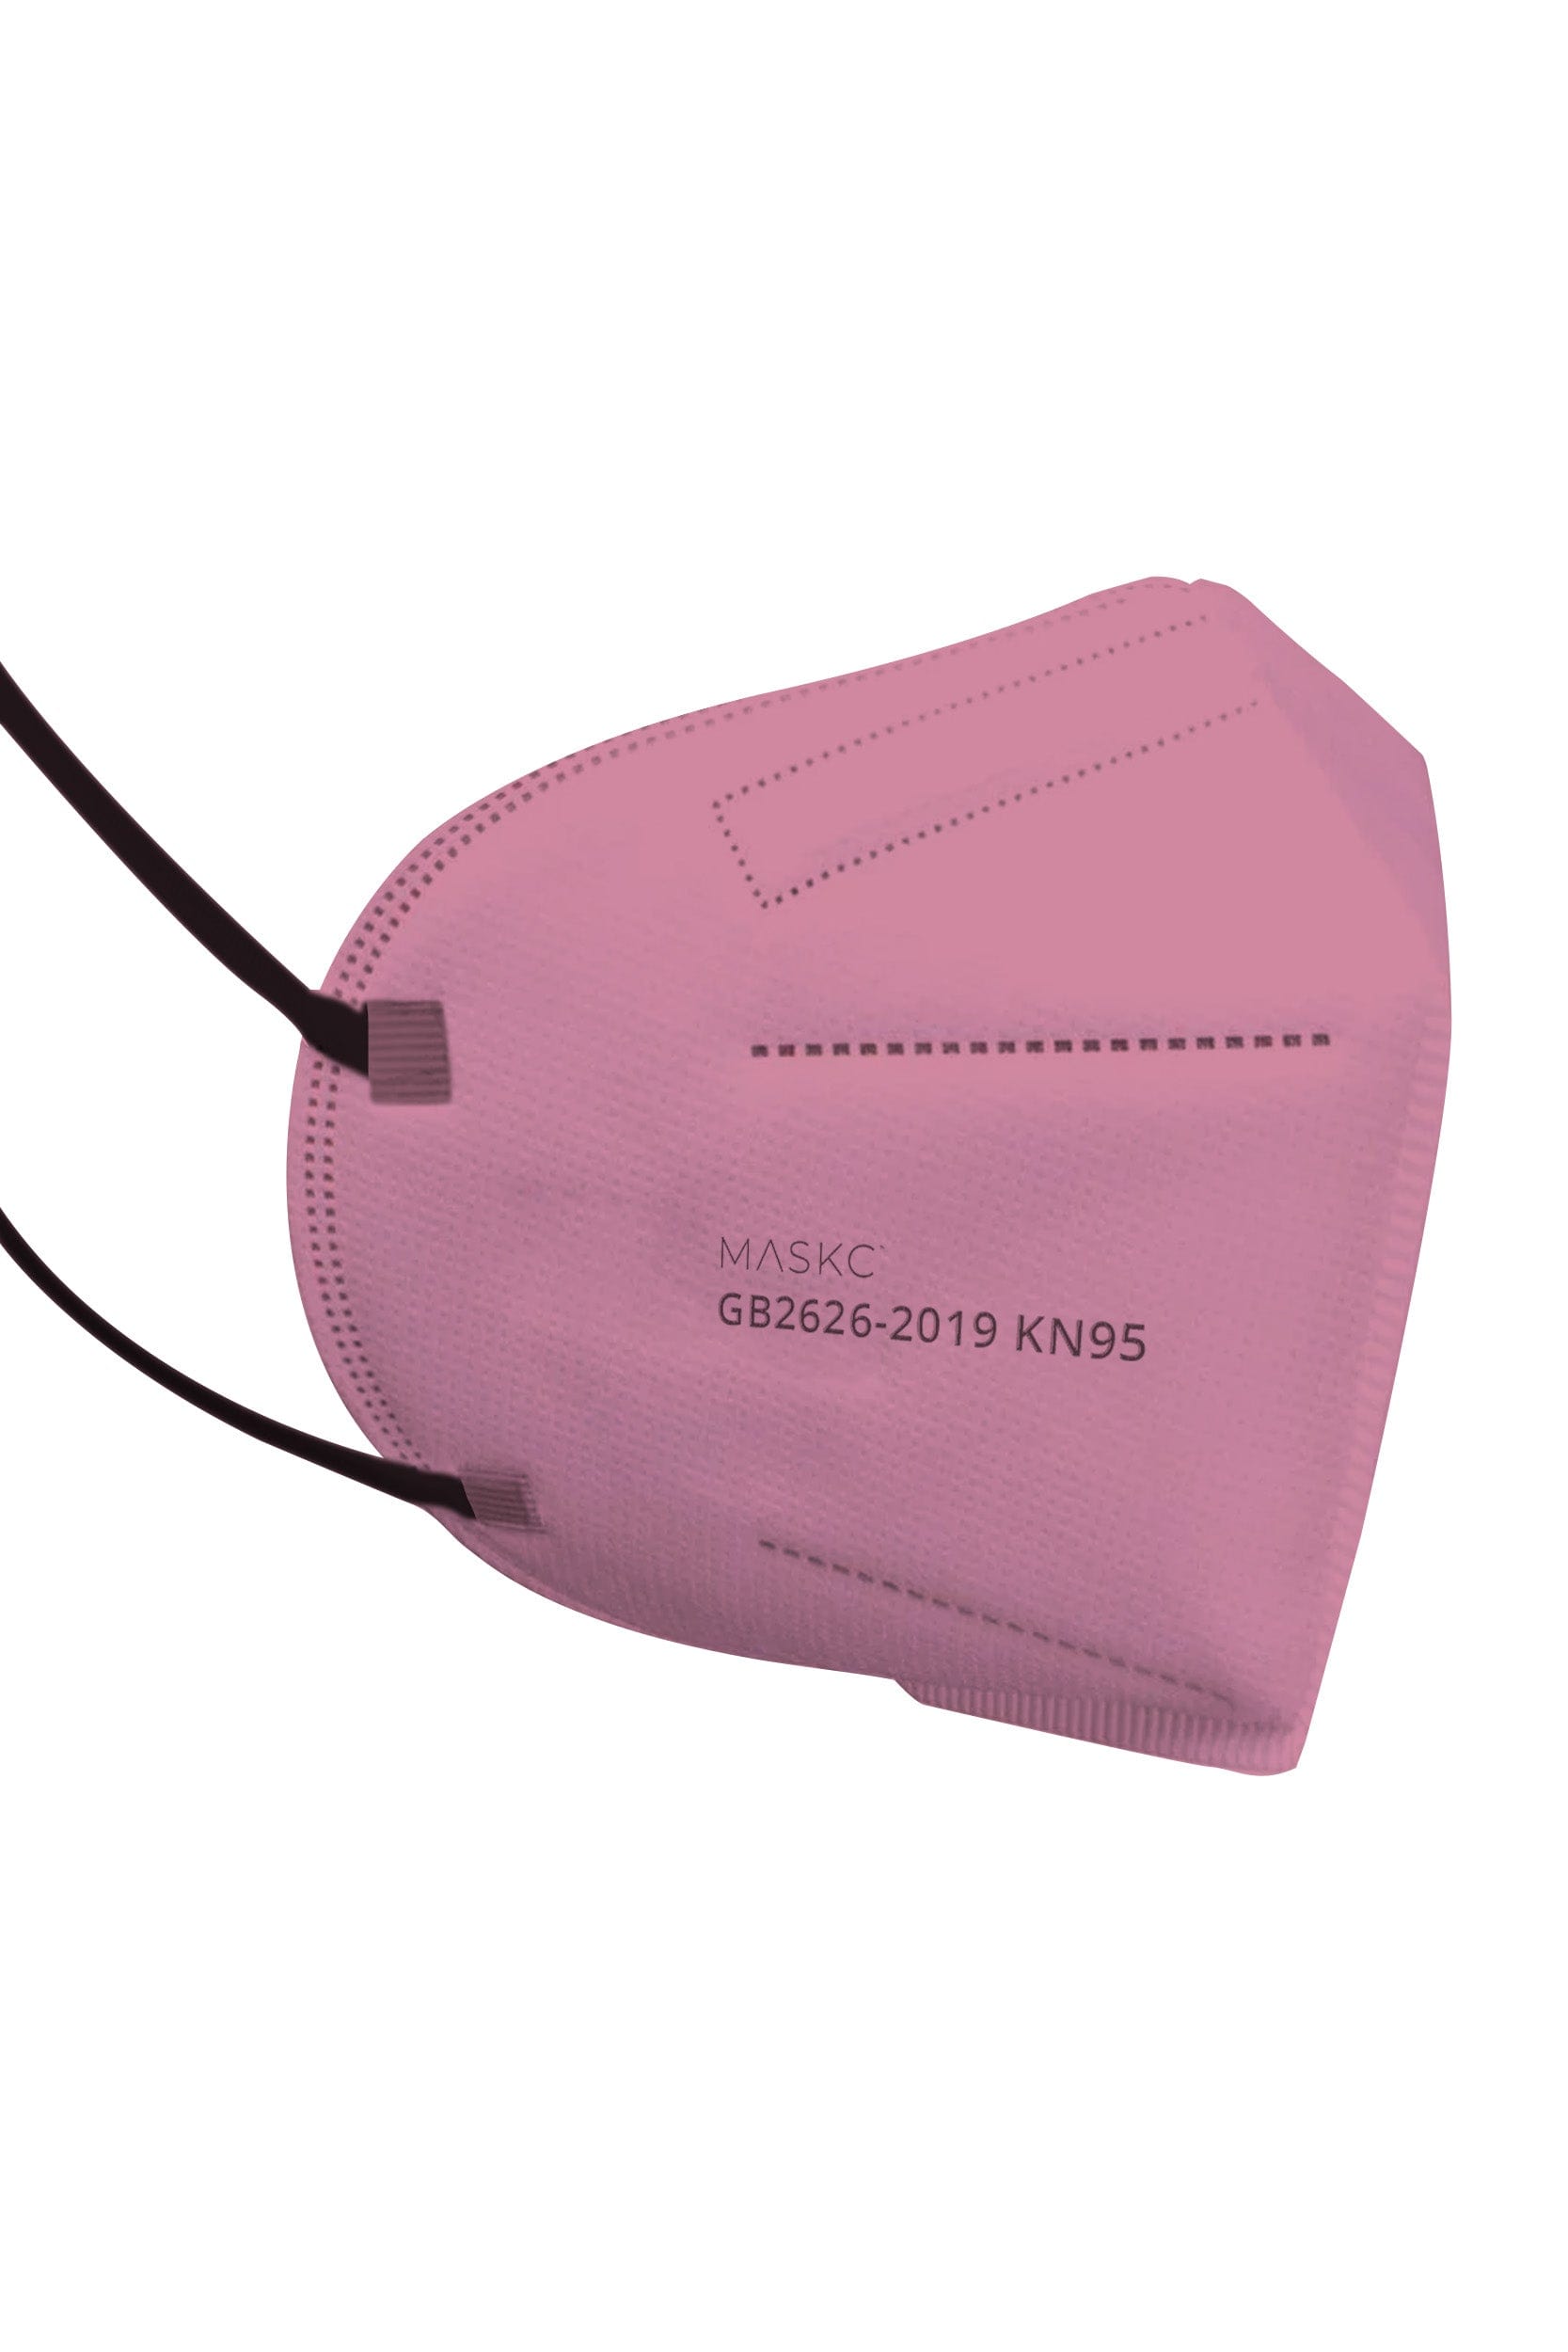 Stylish pink KN95 face mask, with soft black ear loops and high quality fabric. 